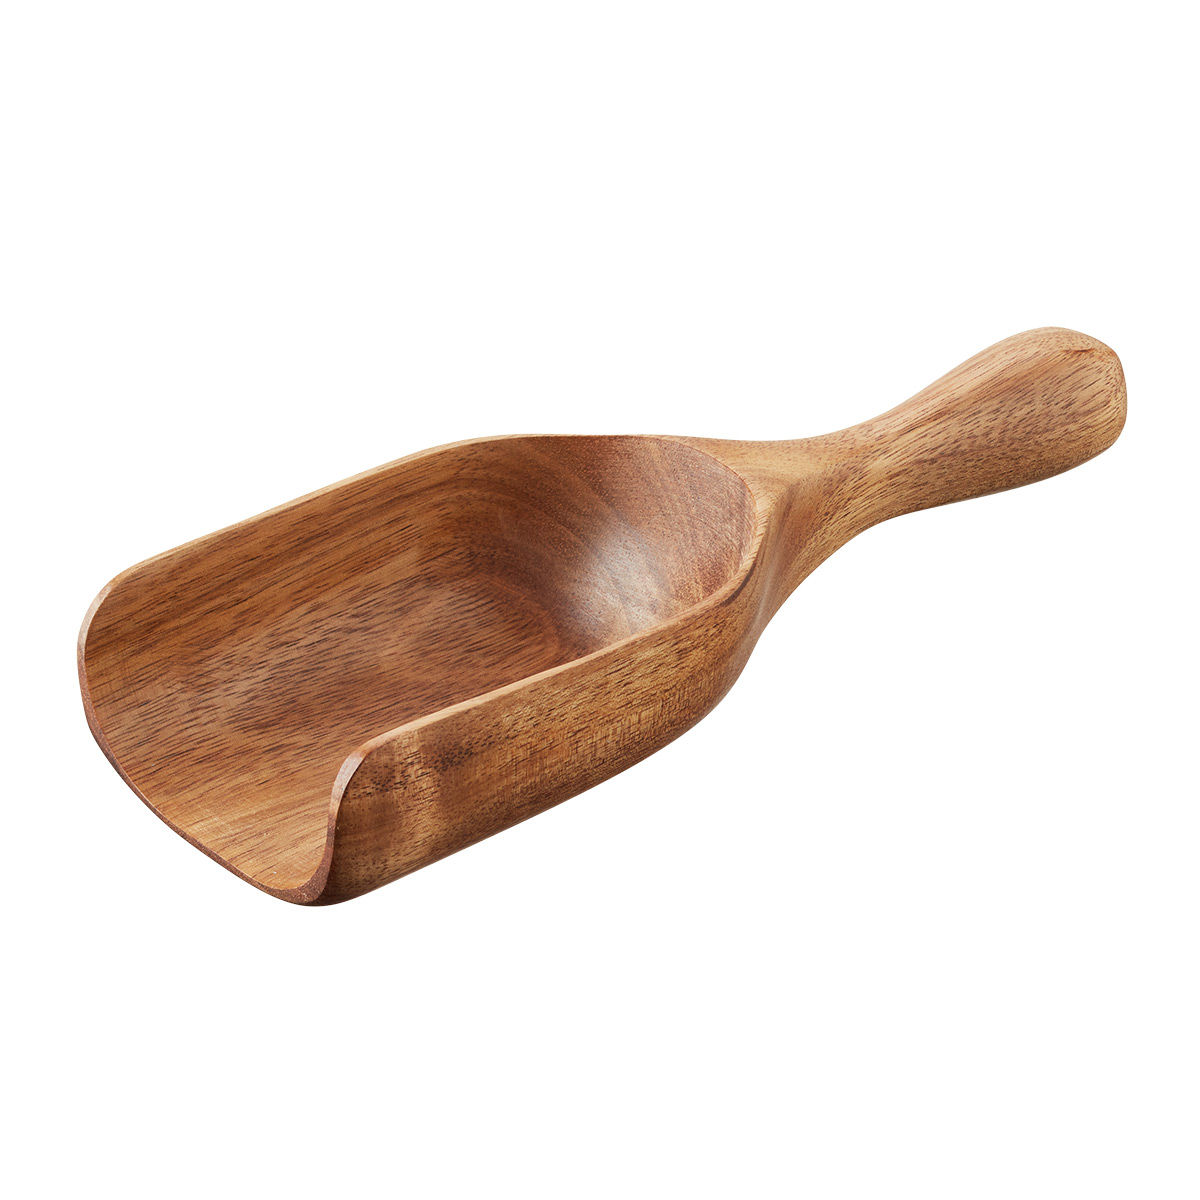 The Container Store Large Wooden Scoop Acacia